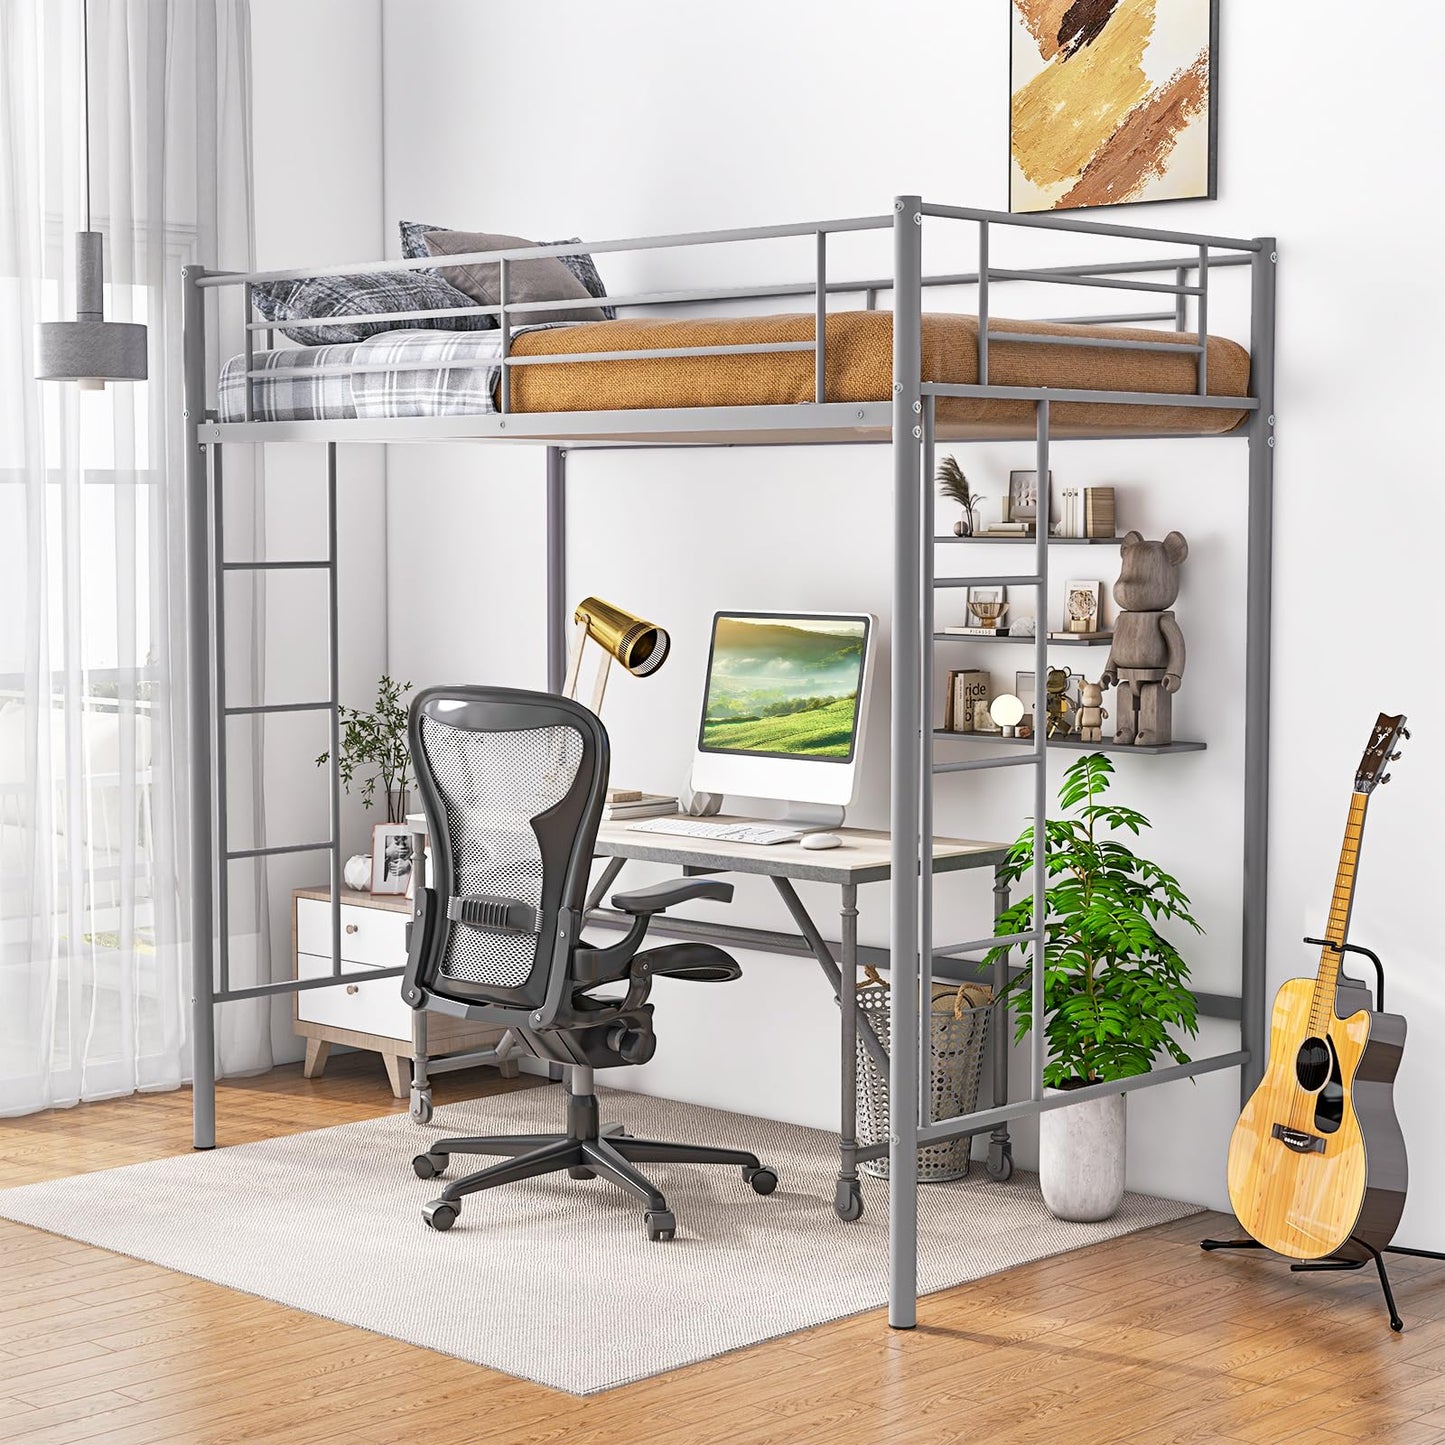 Giantex Metal Loft Bed Twin Size, Heavy Duty Metal Loft Bed Frame with Dual Ladders & Safety Guardrail, No Box Spring Needed, Space-Saving Loft Bed for Juniors Teens Adults (Silver)